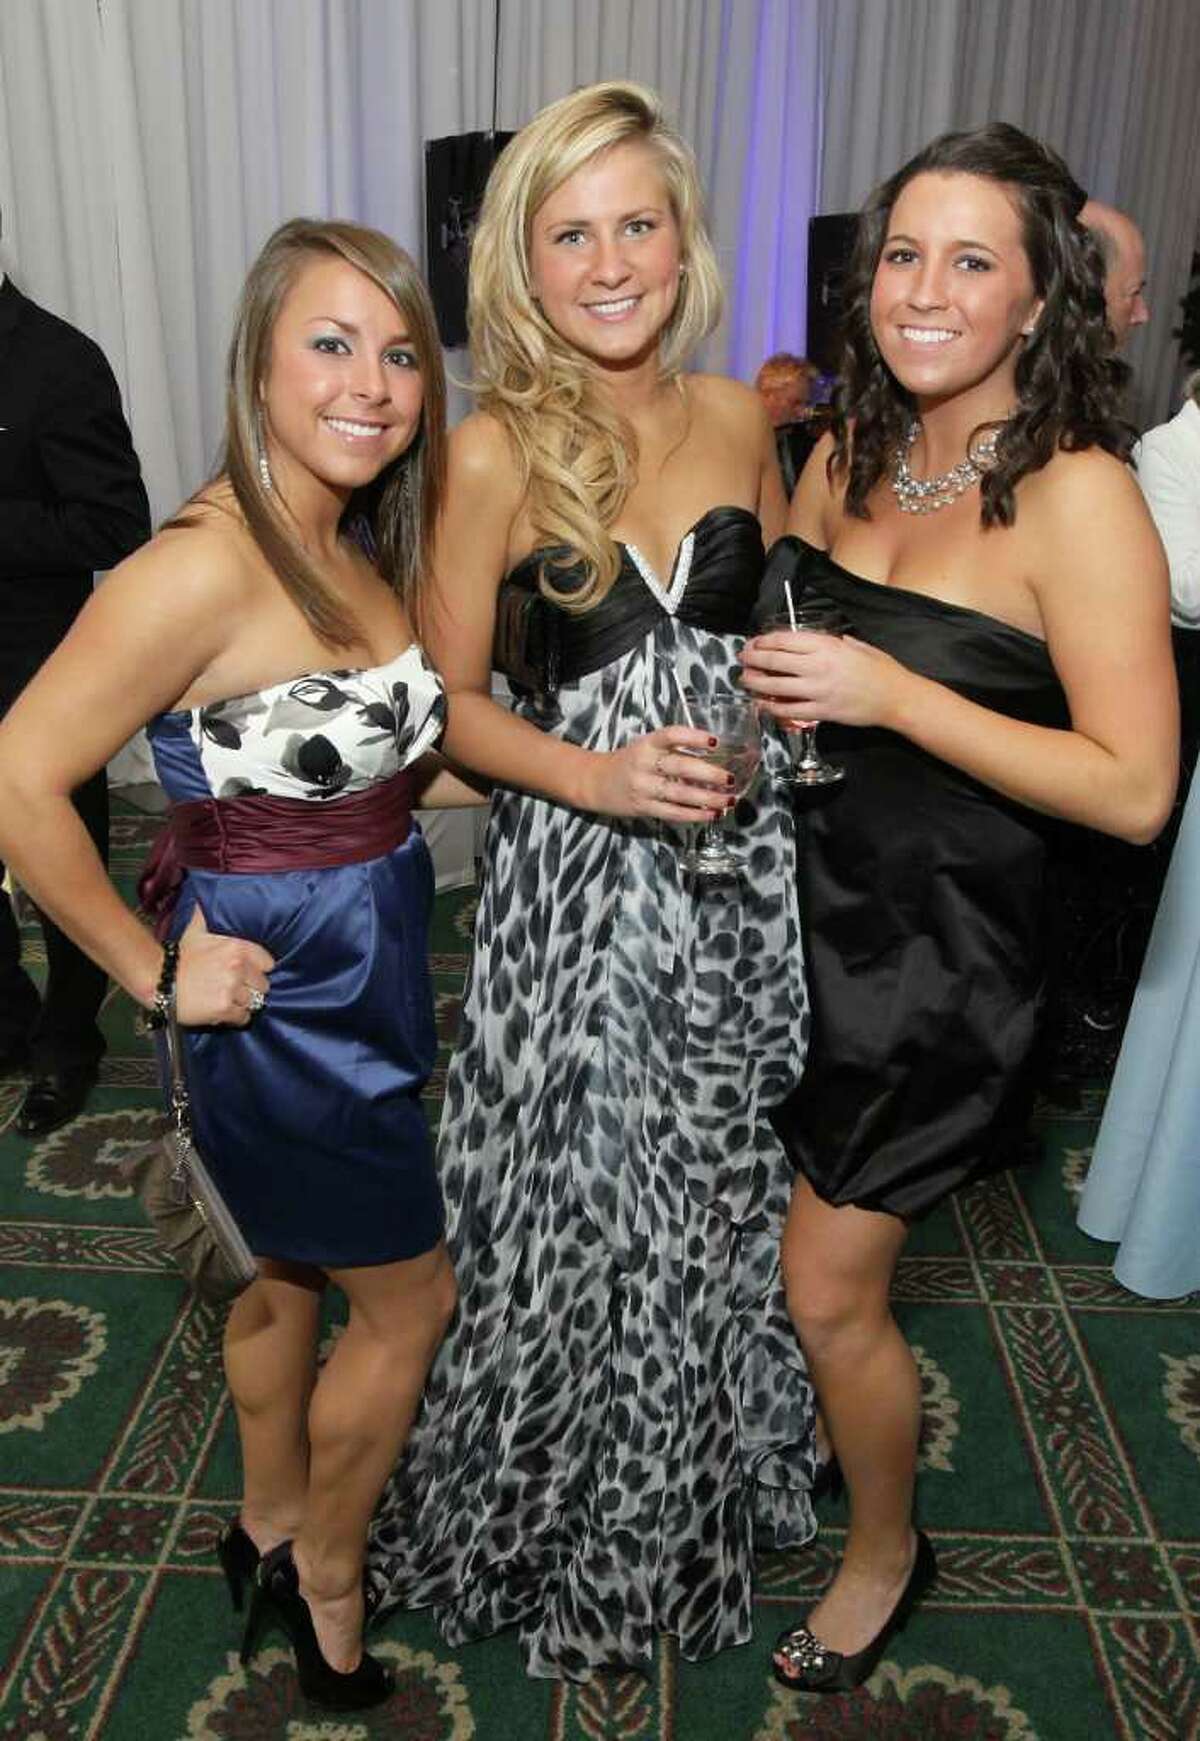 Albany, NY - November 25, 2011 - (Photo by Joe Putrock/Special to the Times Union) - (l to r)Alexandra Laniewski, Mia Staucet and Maggie Cahillane during the 13th Annual Holiday Kick Off to benefit St. Peter's Hospital Foundation.